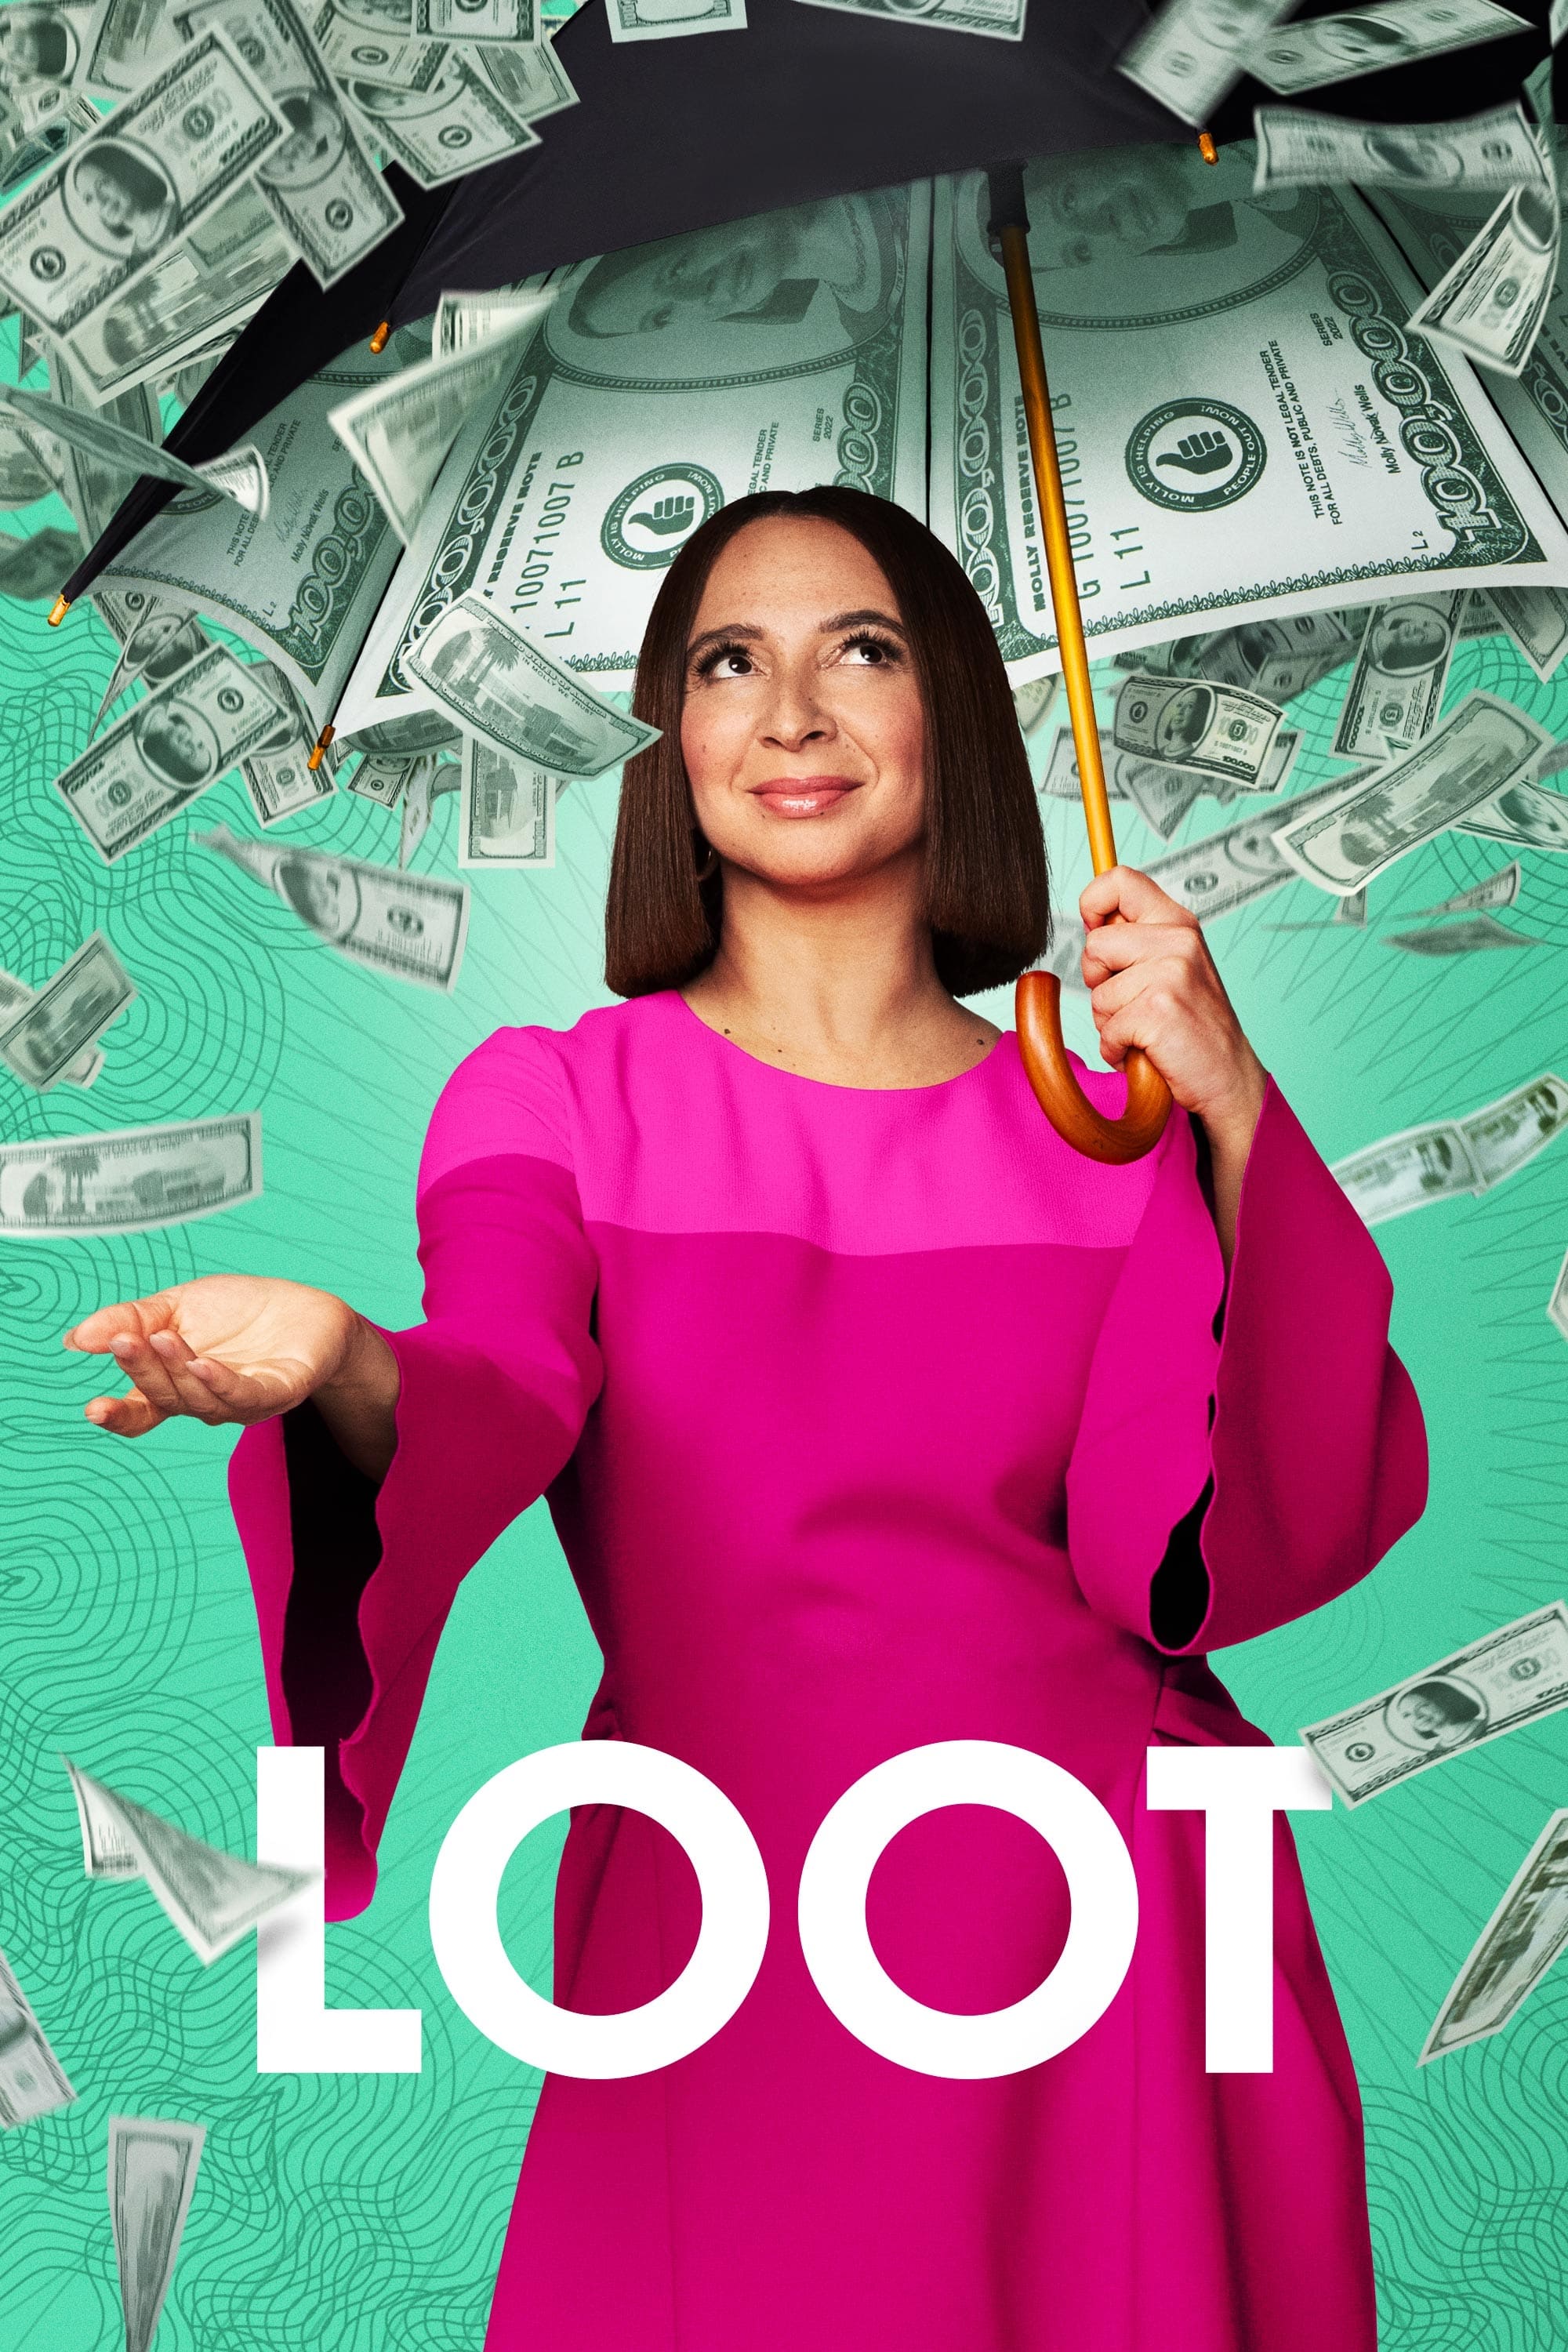 Loot TV Shows About Workplace Comedy